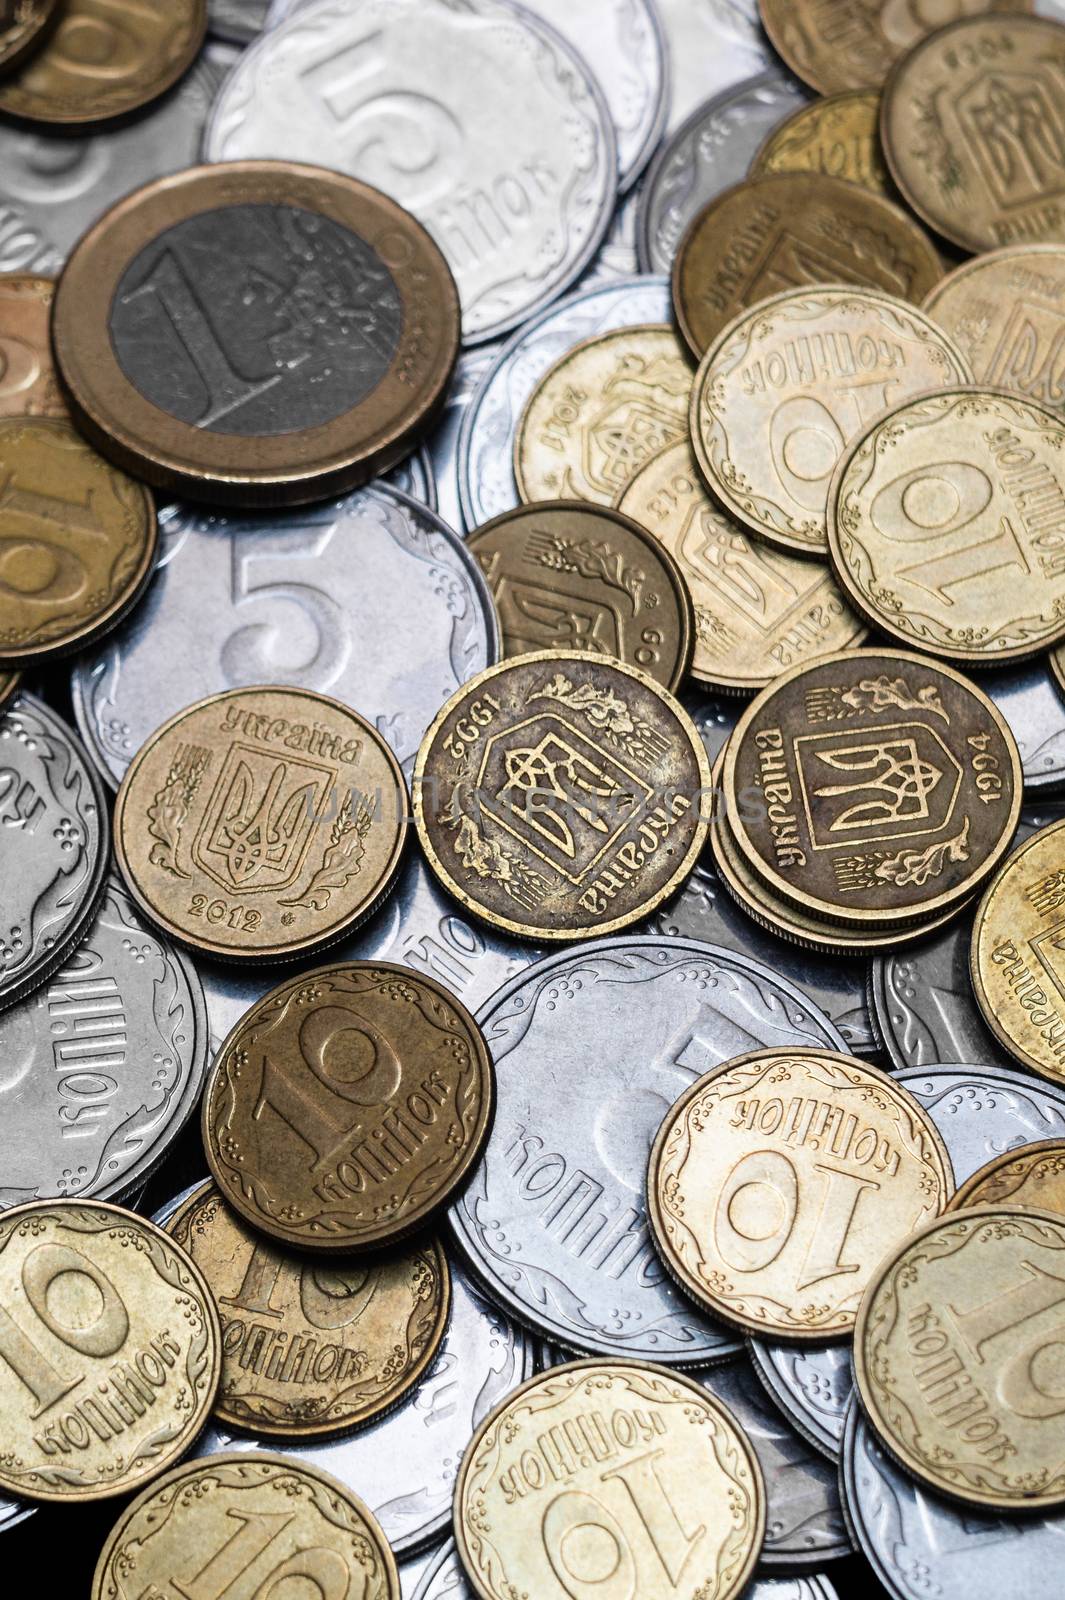 Ukrainian coins with one euro coin isolated on black background. Close-up view. Coins are located at center of frame. A conceptual image. by alexsdriver